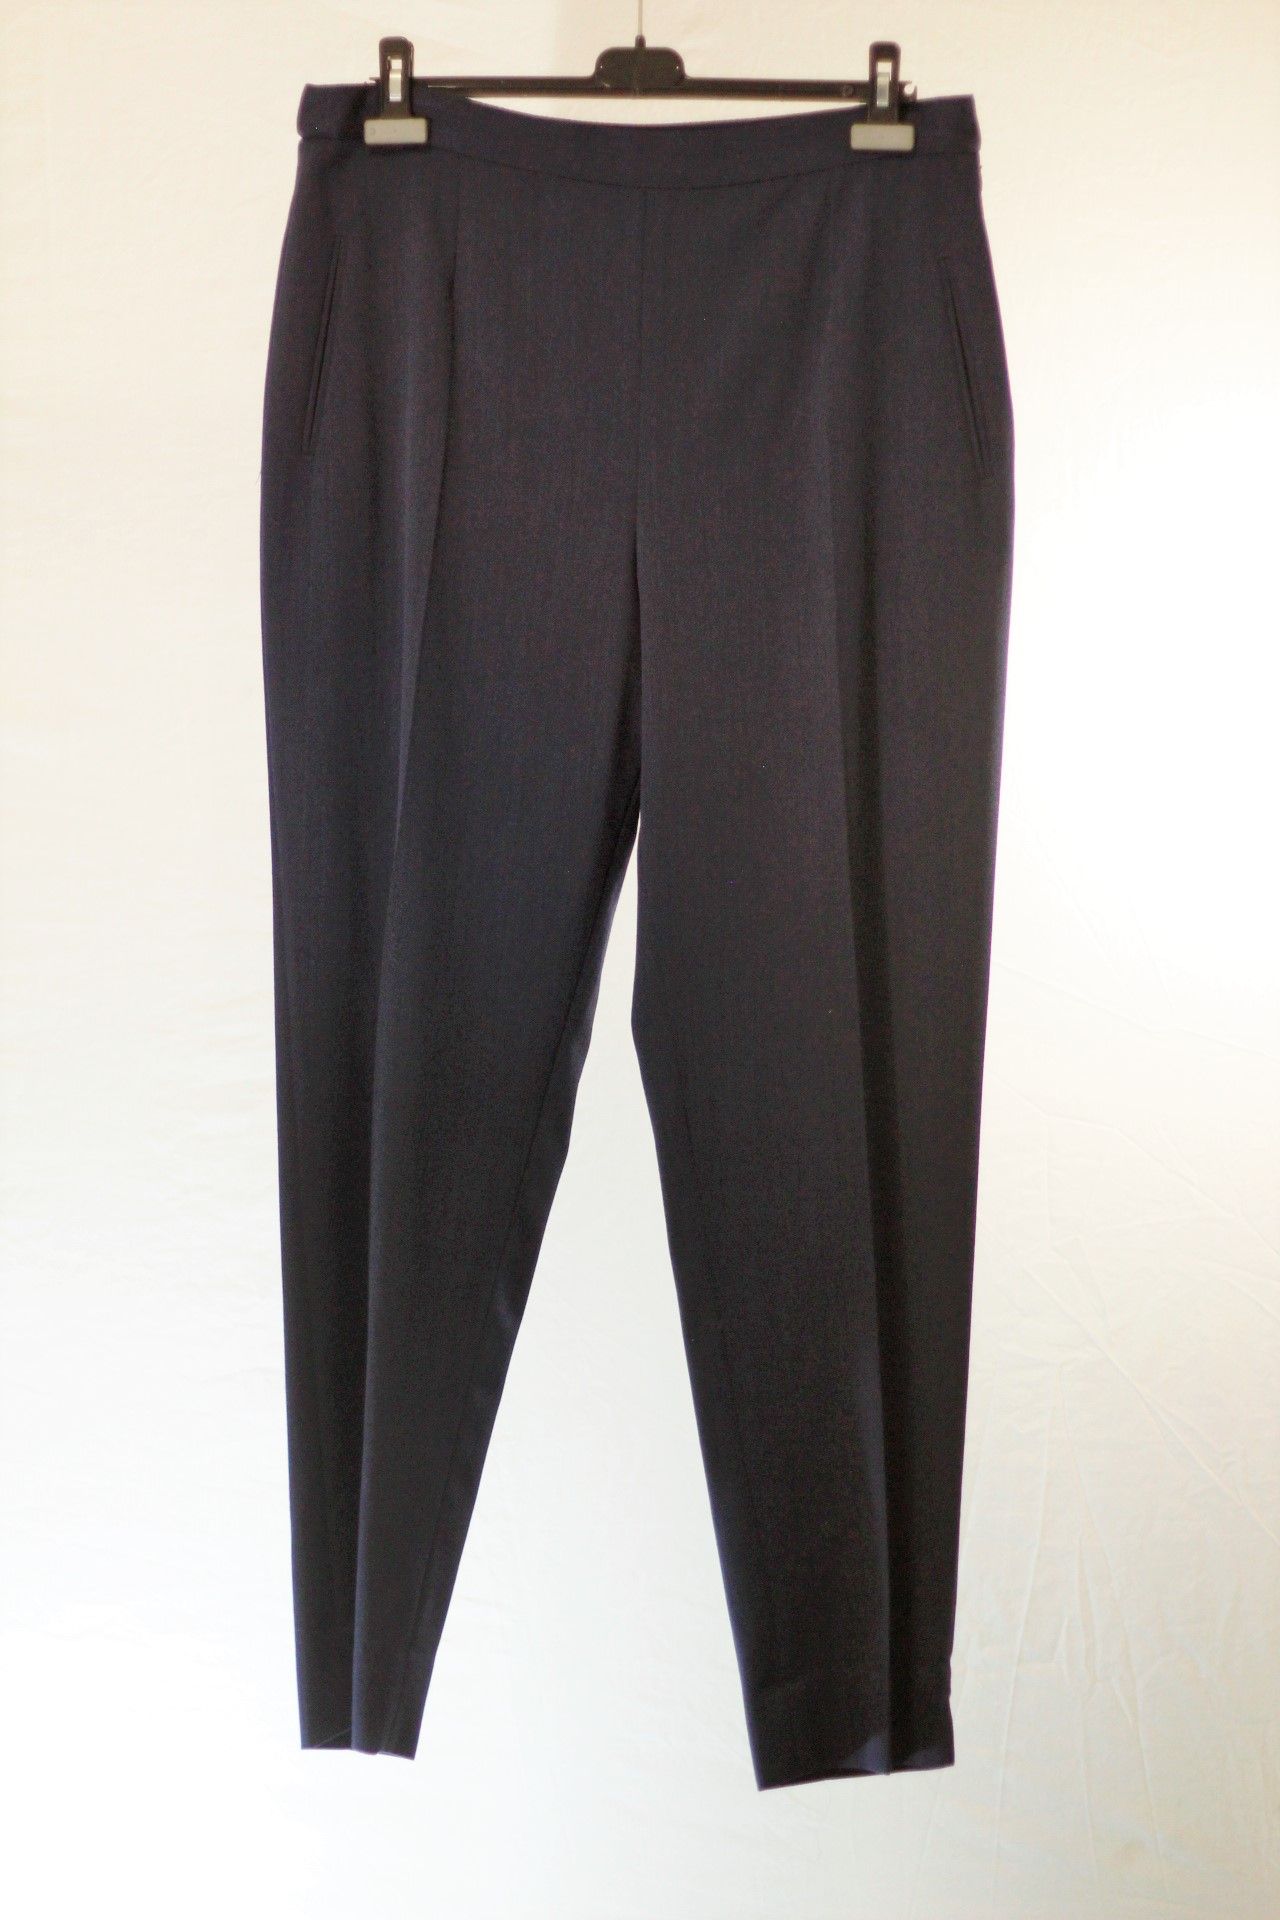 1 x Belvest Navy Trousers - Size: 26 - Material: Wool/ Cotton - From a High End Clothing Boutique In - Image 2 of 9